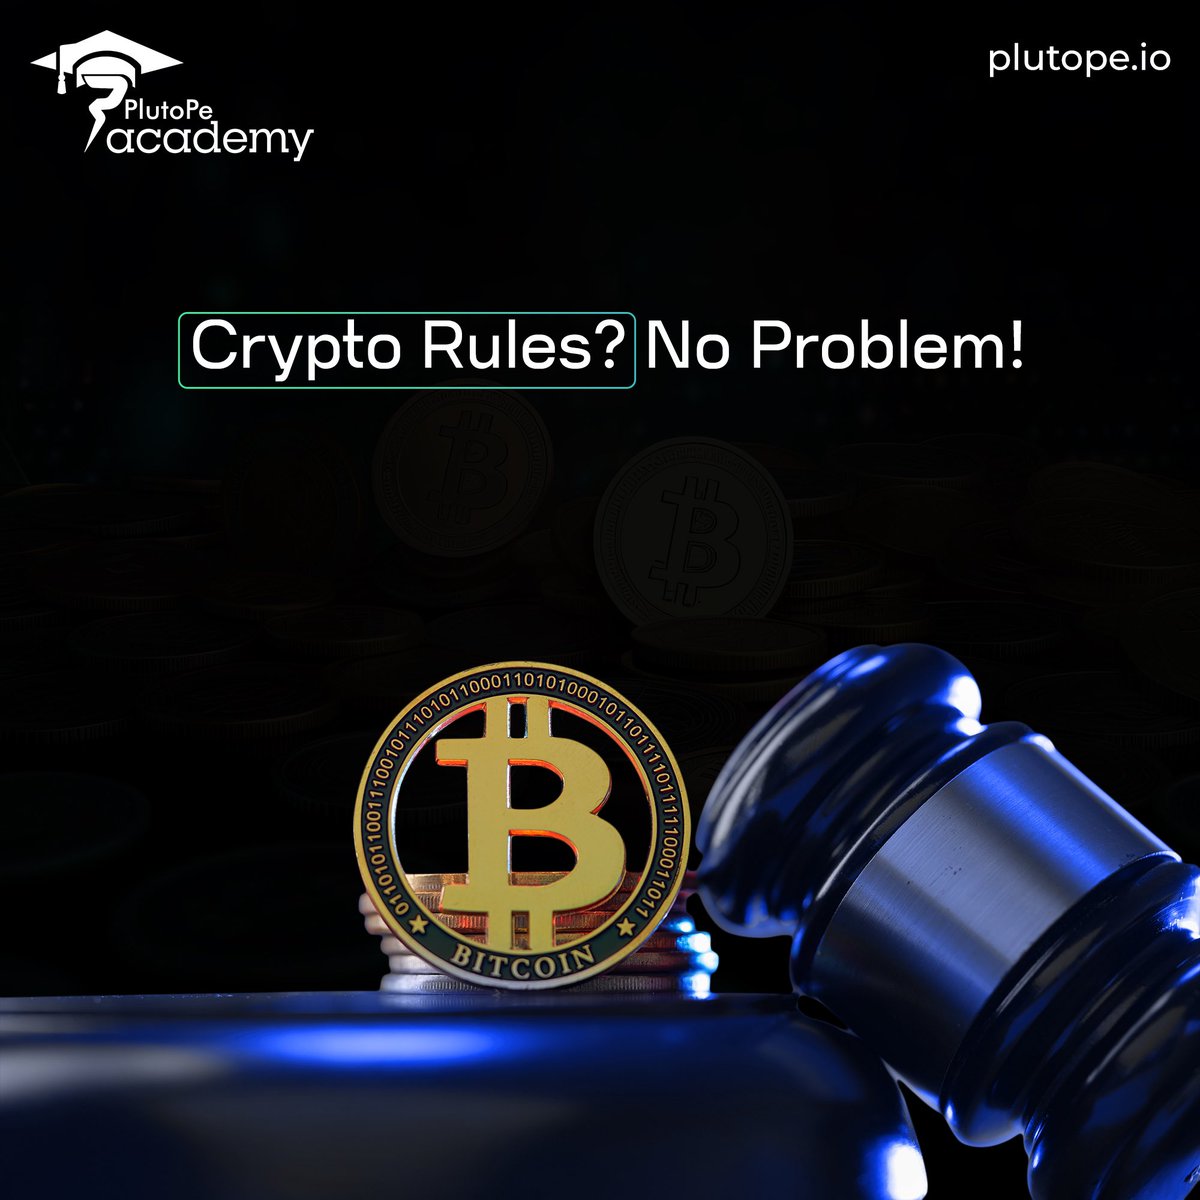 'Have you heard talk of #cryptoregulations but are unsure of their meaning?  🤔

We've got you, so don't worry! 🤩Everything is explained in simple terms in this #thread, including how to interpret traffic lights to get your magic internet money! ✨ #cryptoexplained